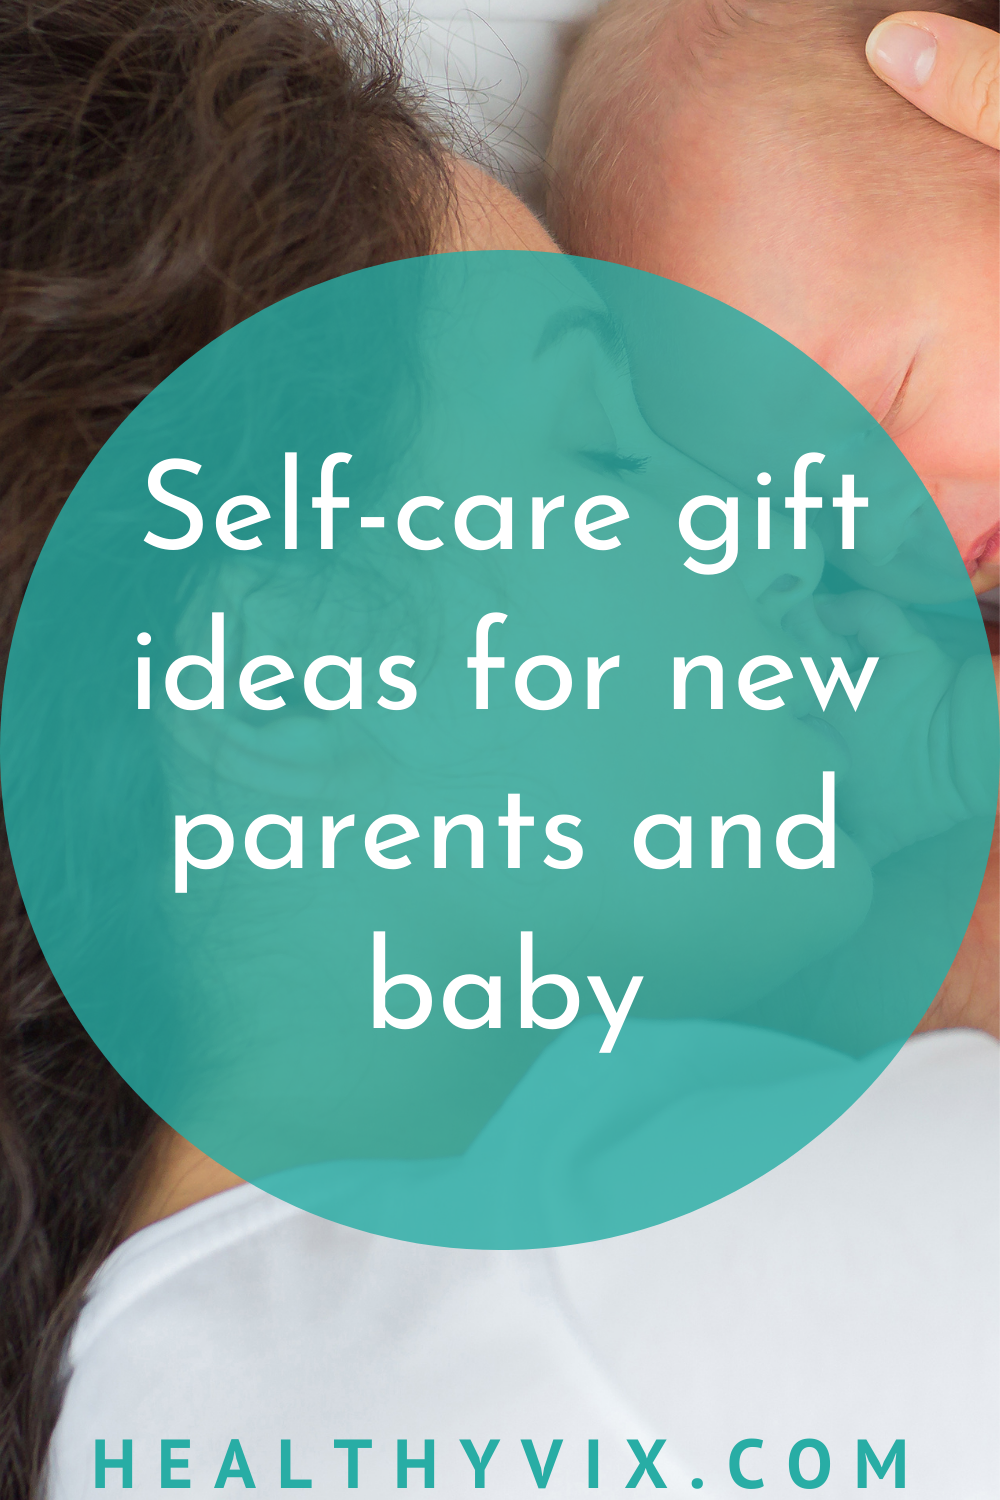 Self-care gift ideas for new parents and baby